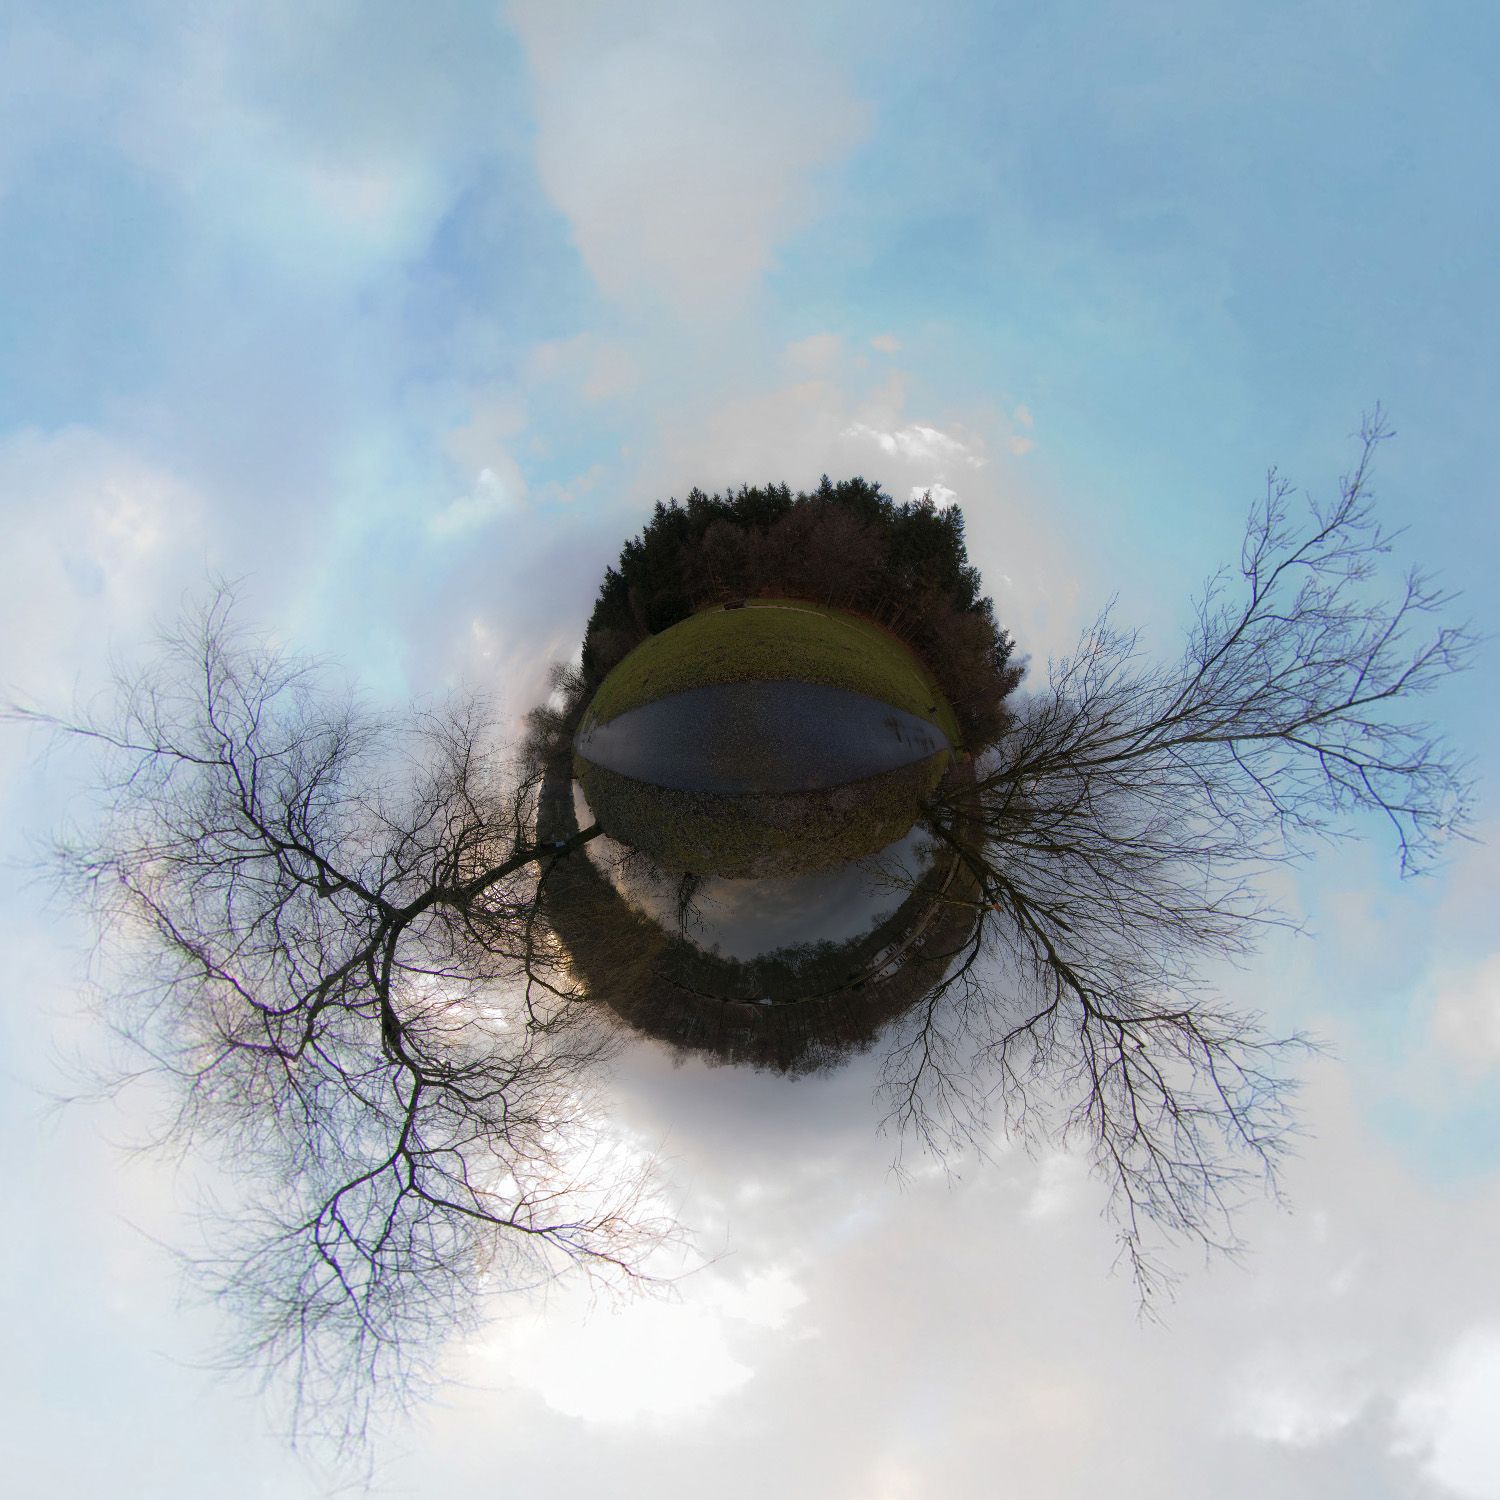 Panorama 006 - Little Planet